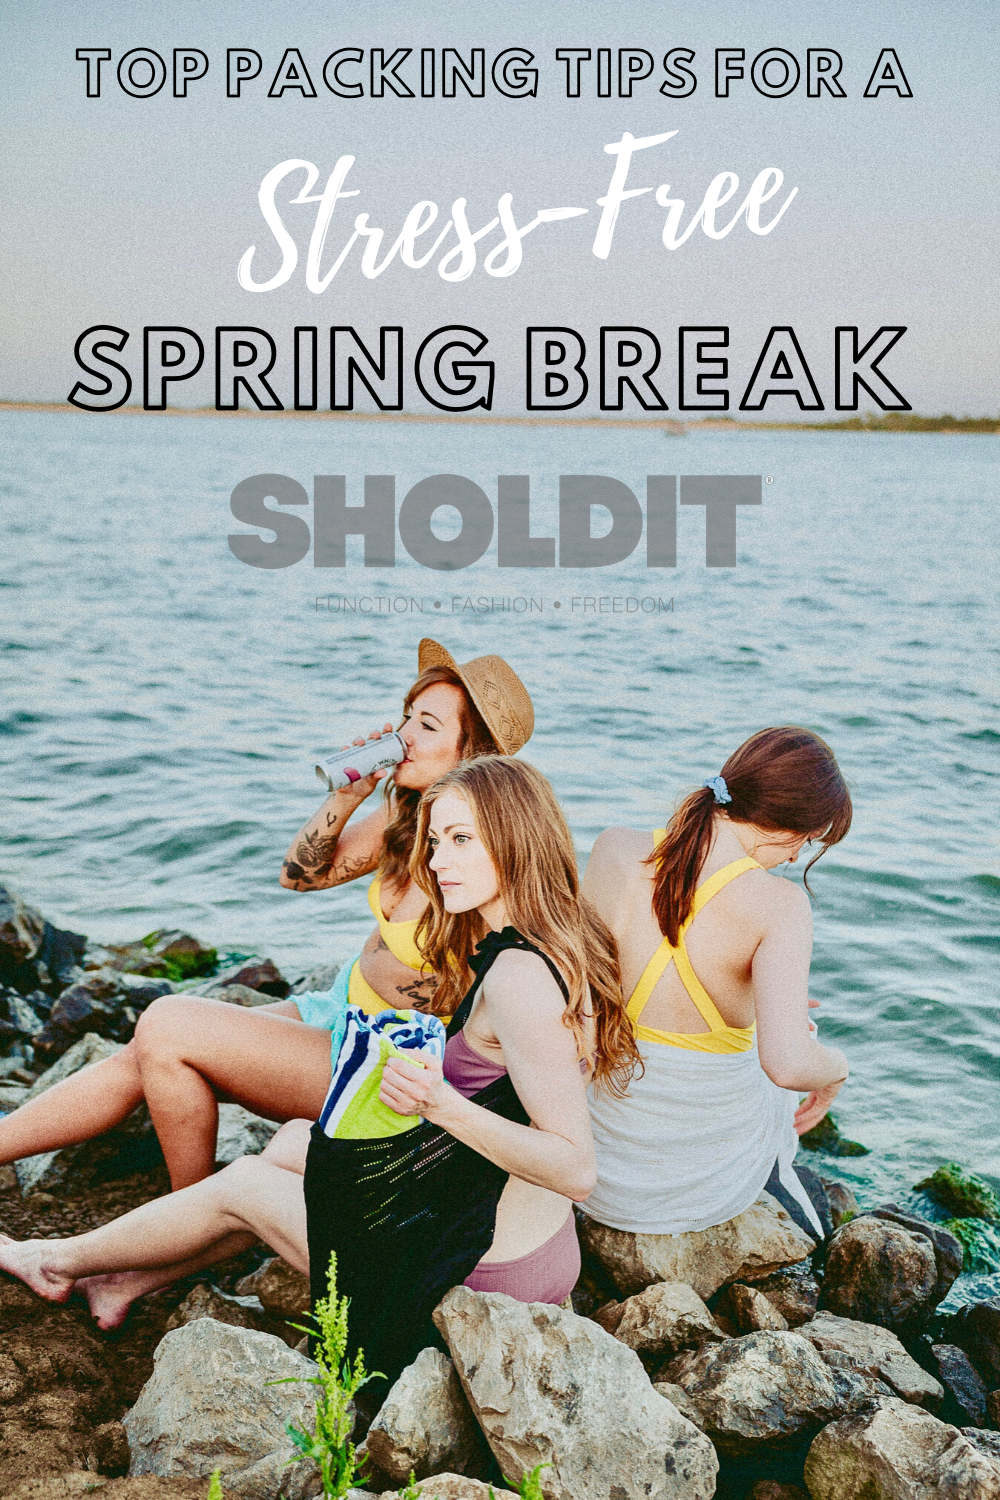 Top Packing Tips for a Stress-Free Spring Break